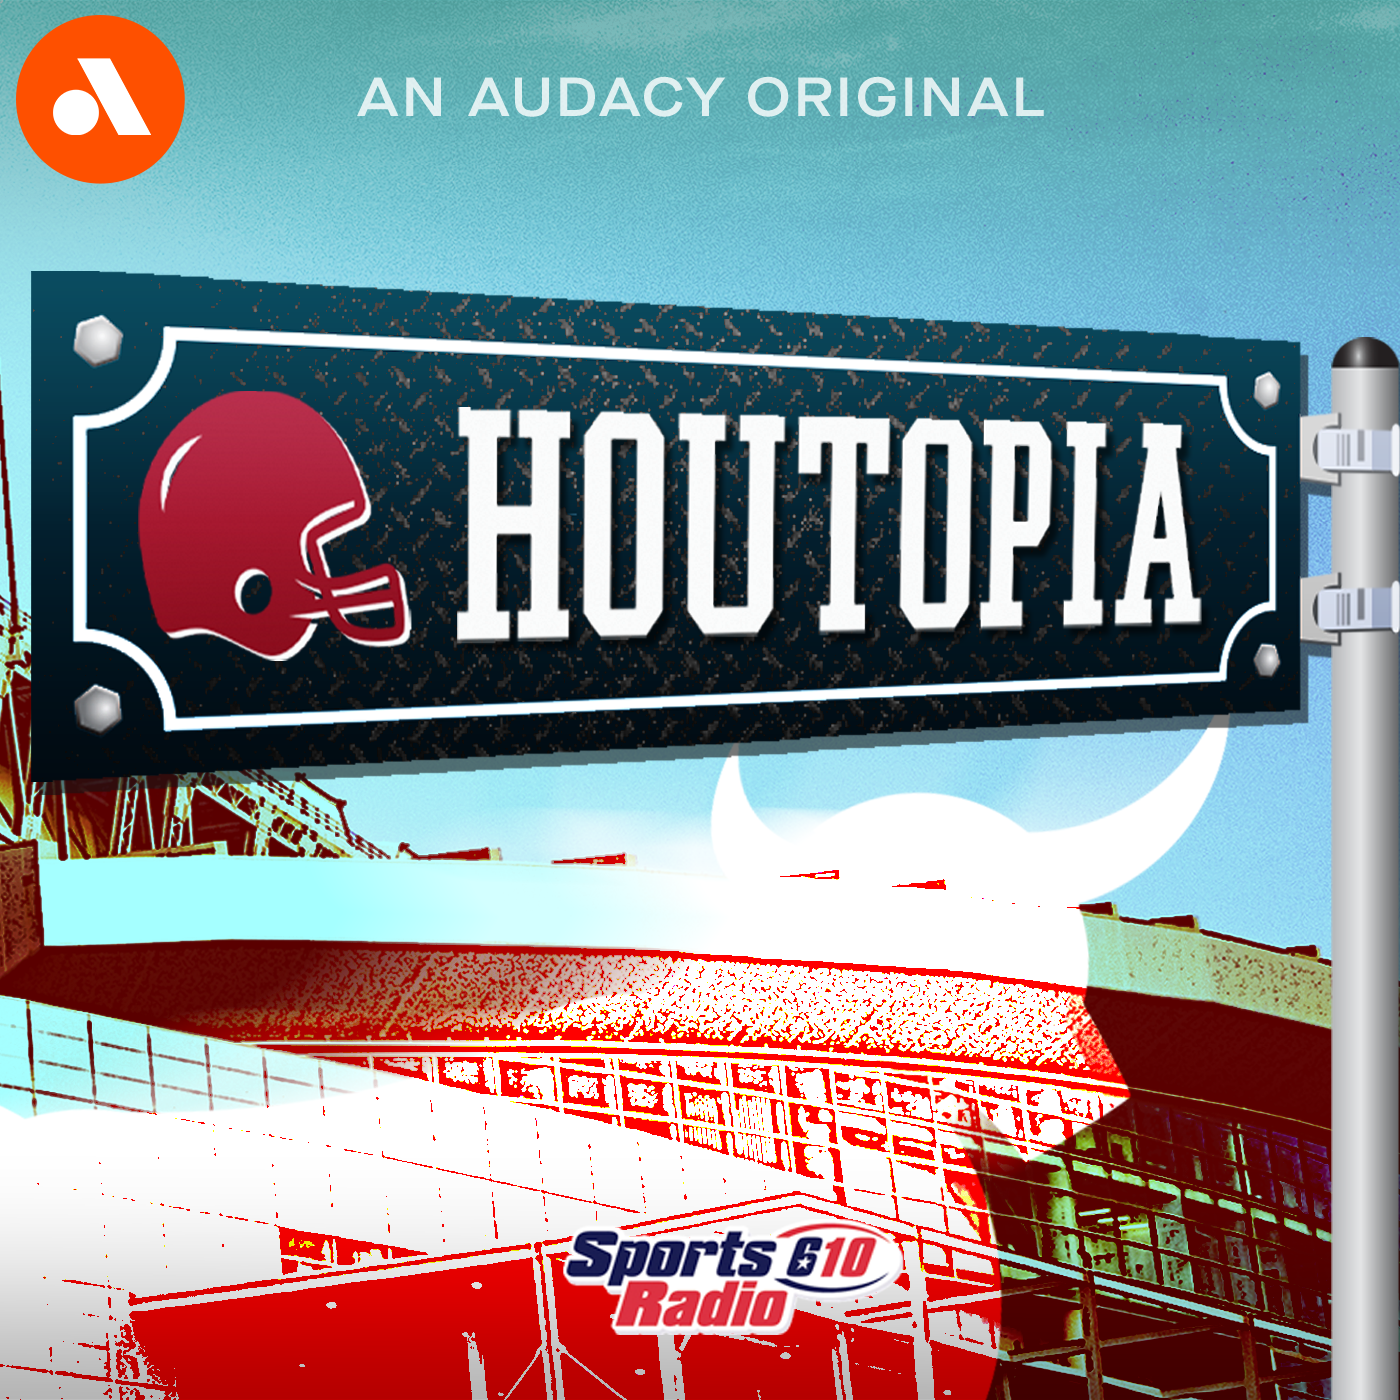 Cody Stoots on Texans’ Draft; Best Pick? Worst? Most Interesting? | 'Houtopia Football Podcast'